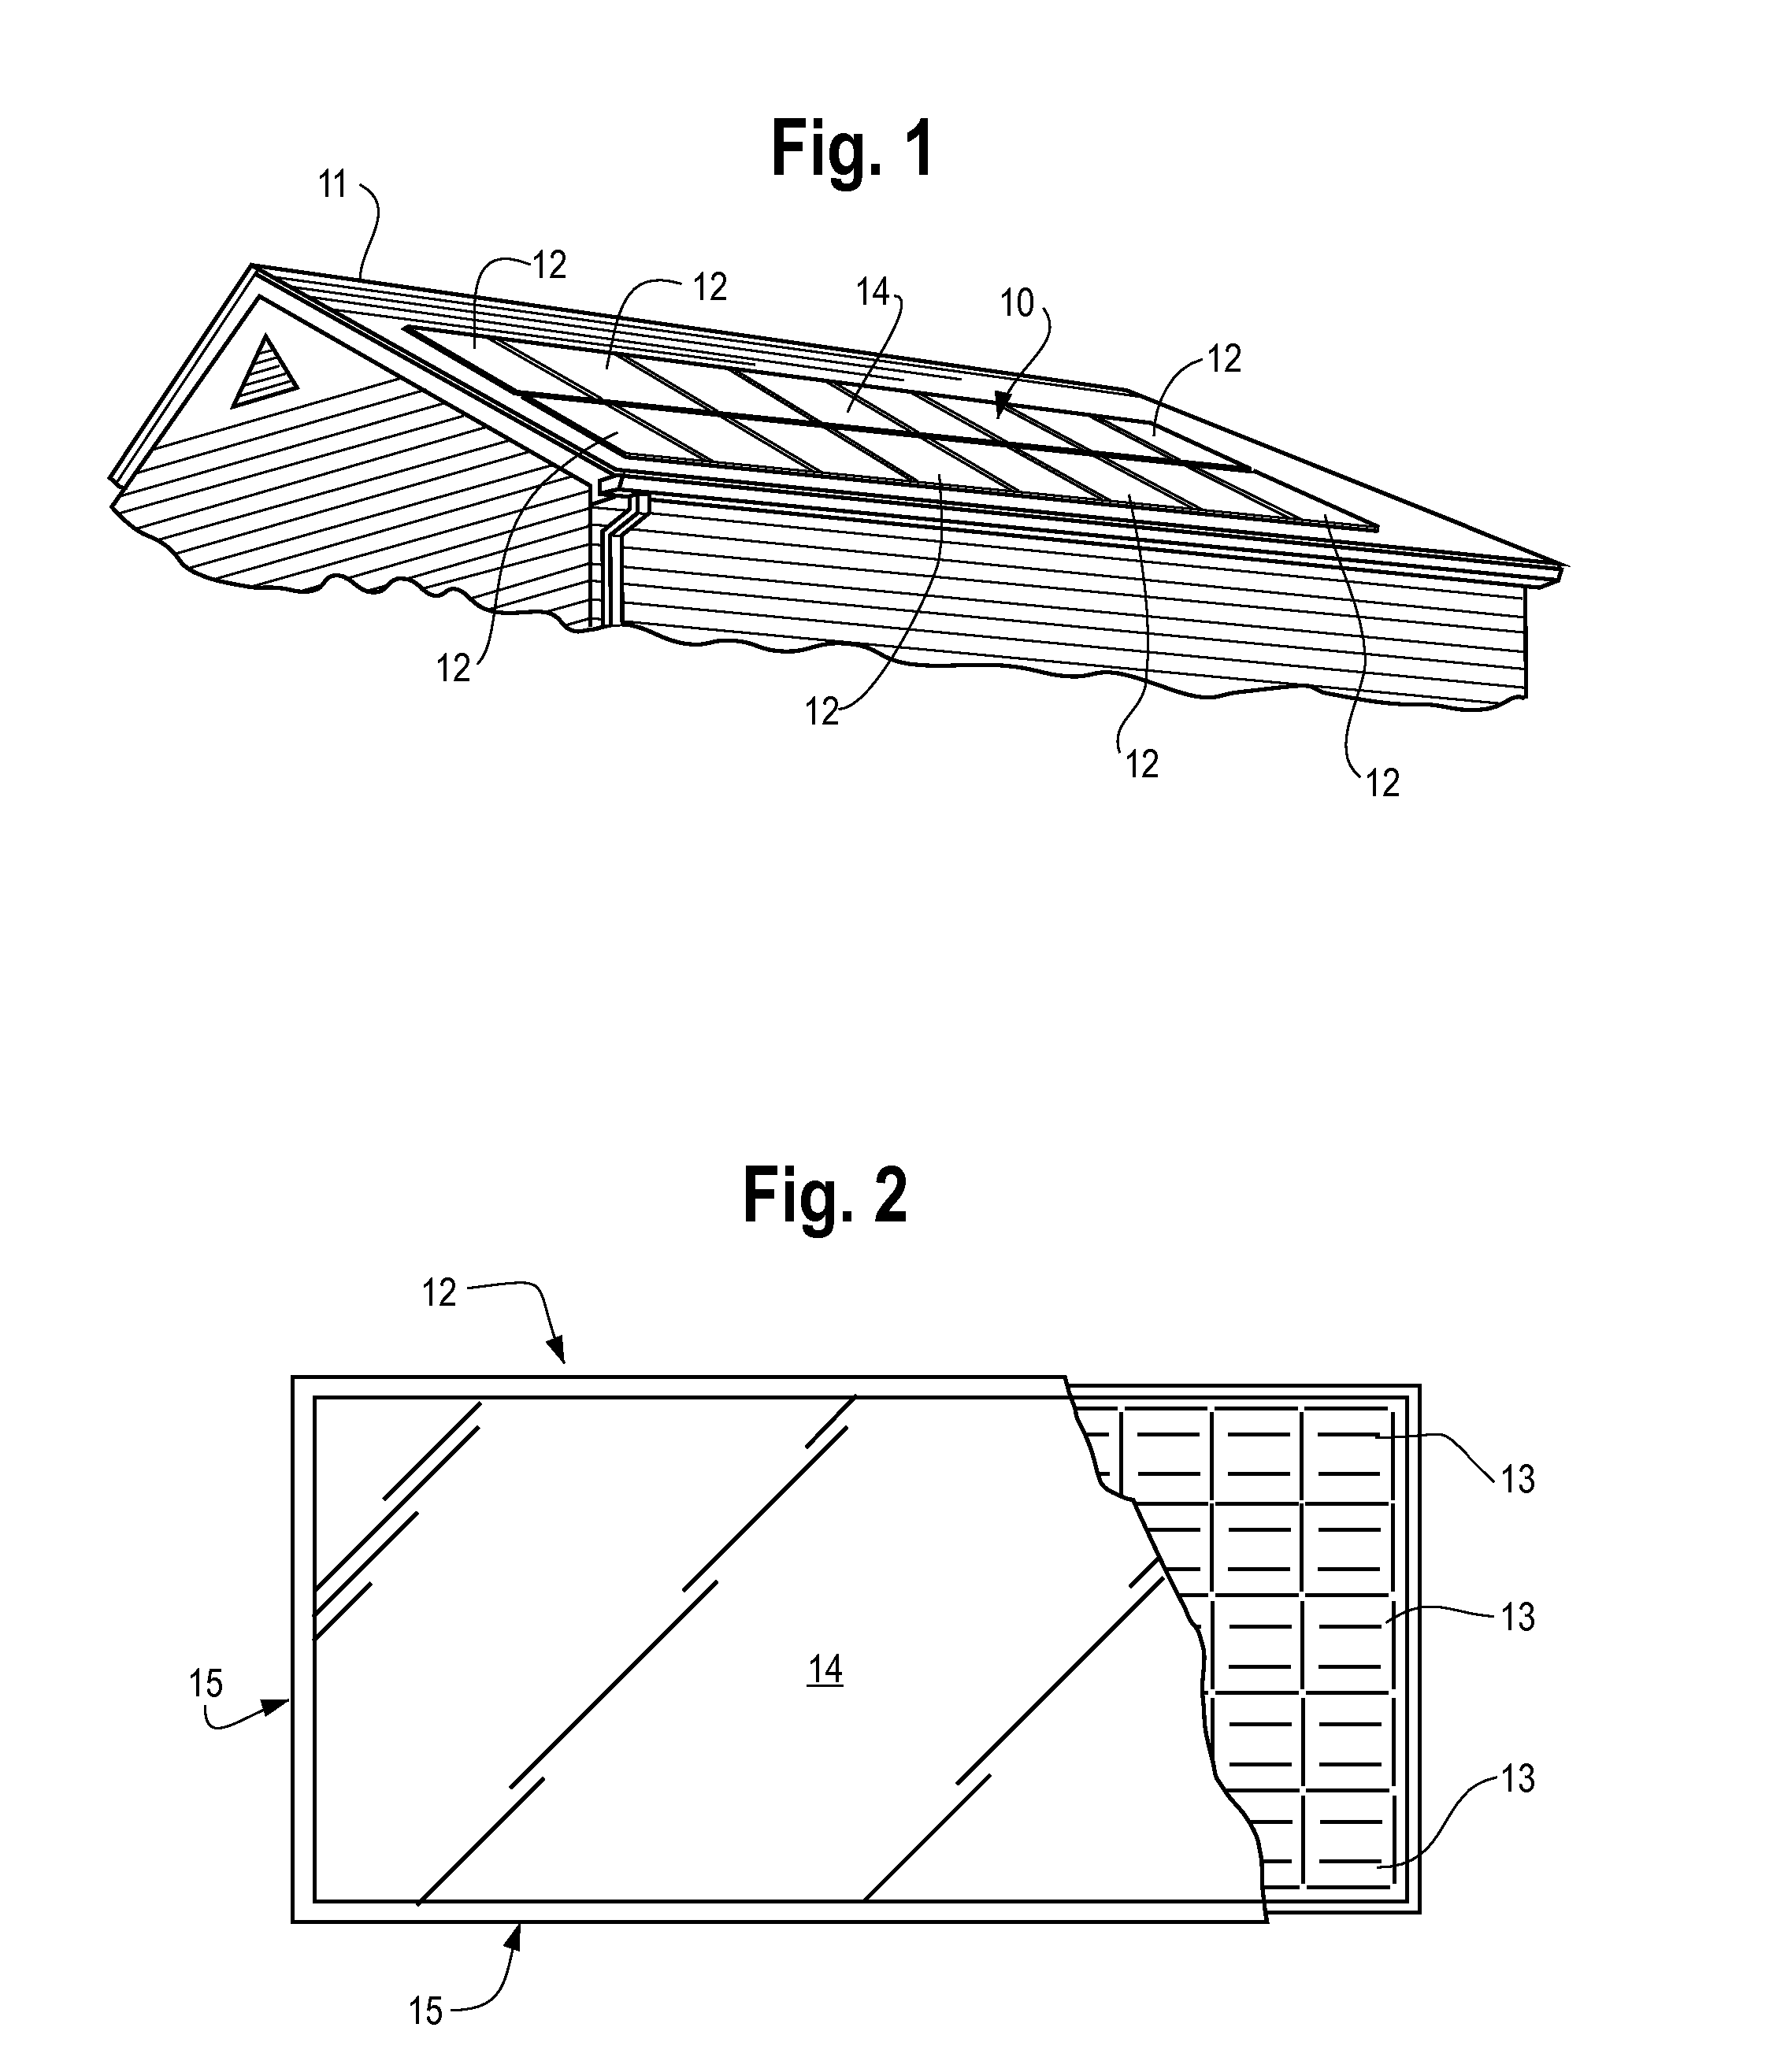 Means and Method for Electrically Connecting Photovoltaic Cells in a Solar Module